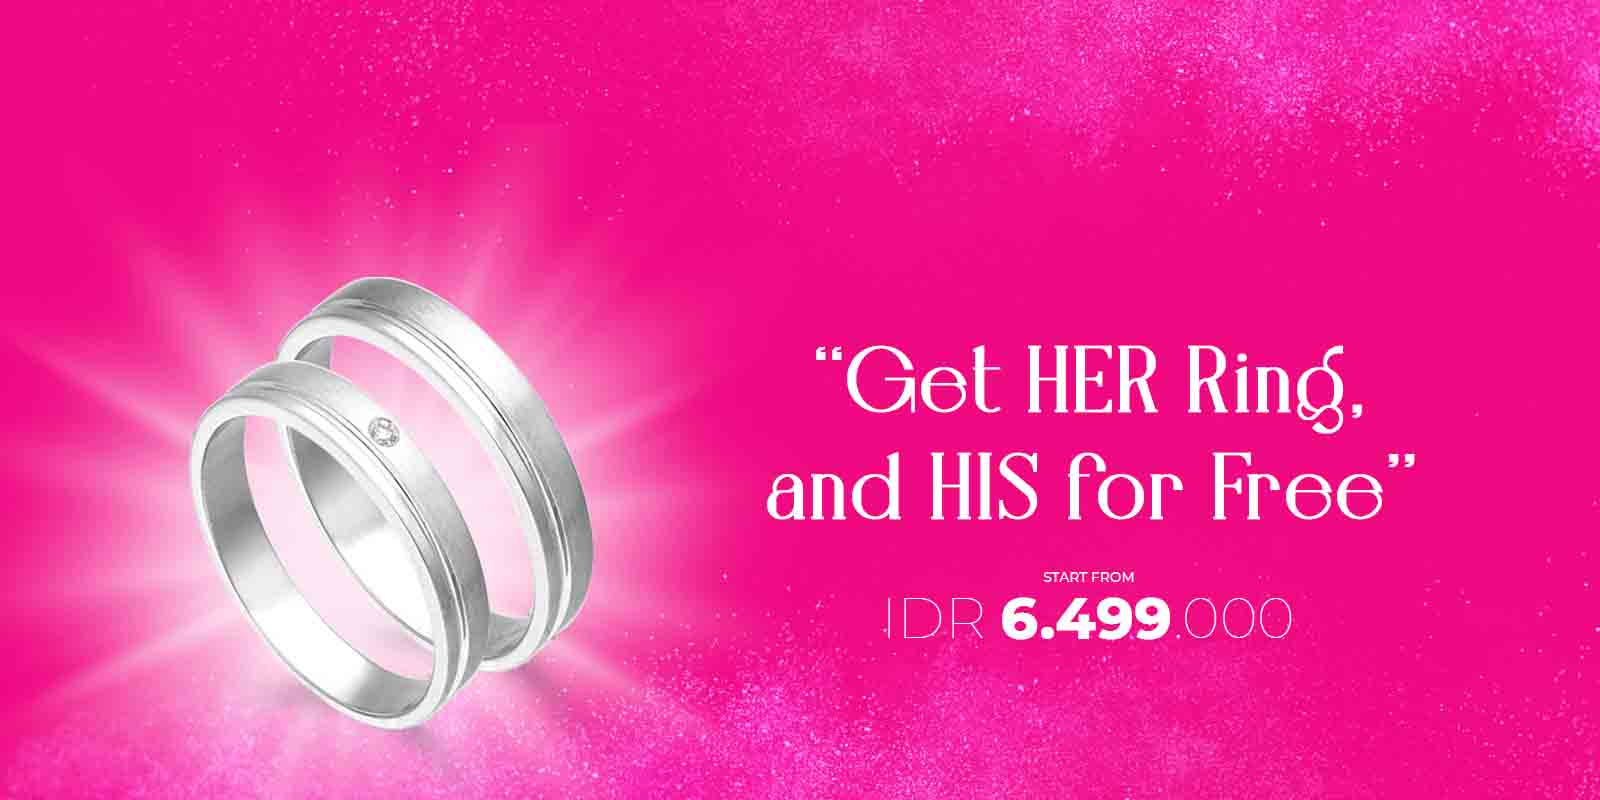 Get Her Ring and For Him for Free